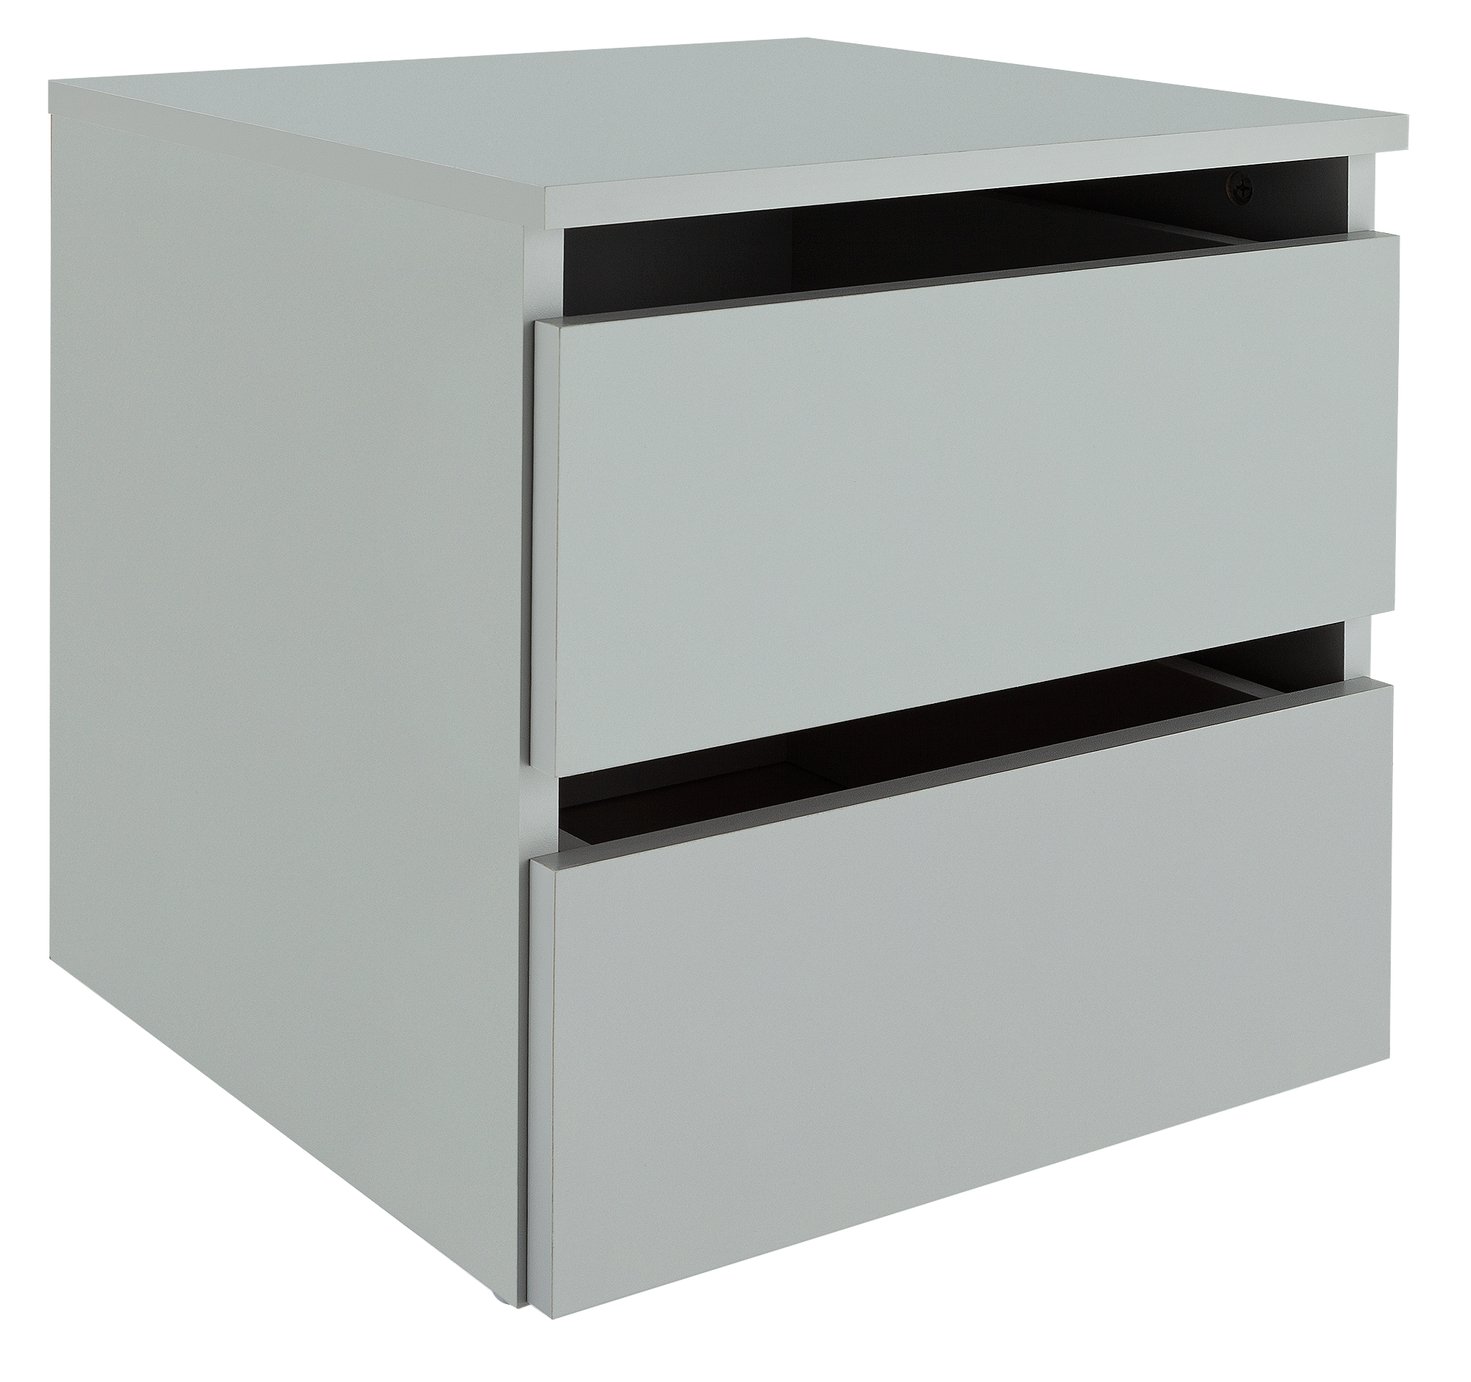 Argos Home Holsted Small 2 Drawer Internal Chest